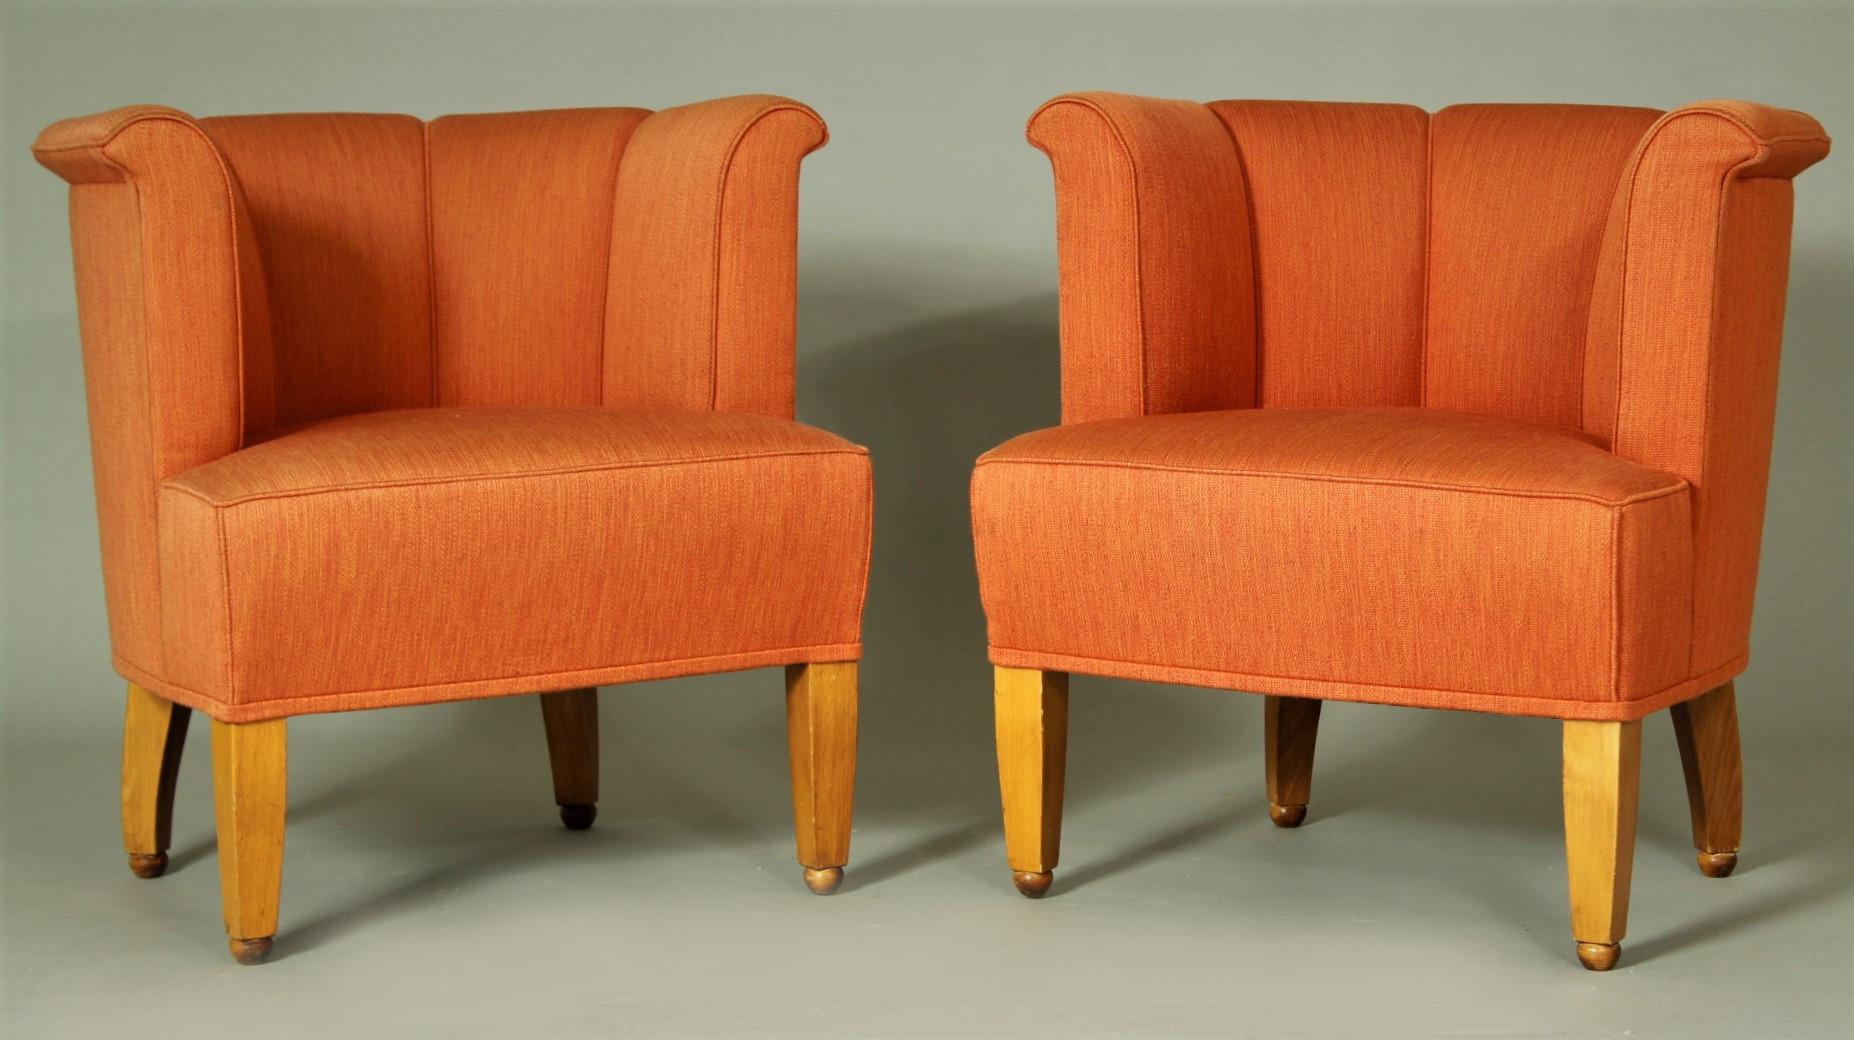 Pair of Austrian Alleegasse easy chairs designed by Josef Hoffmann in 1912. They were designed for Dr. Hugo Koller’s music room as part of the furnishings for his Vienna apartment. These high quality made chairs are a re-edition by Wittmann Austria